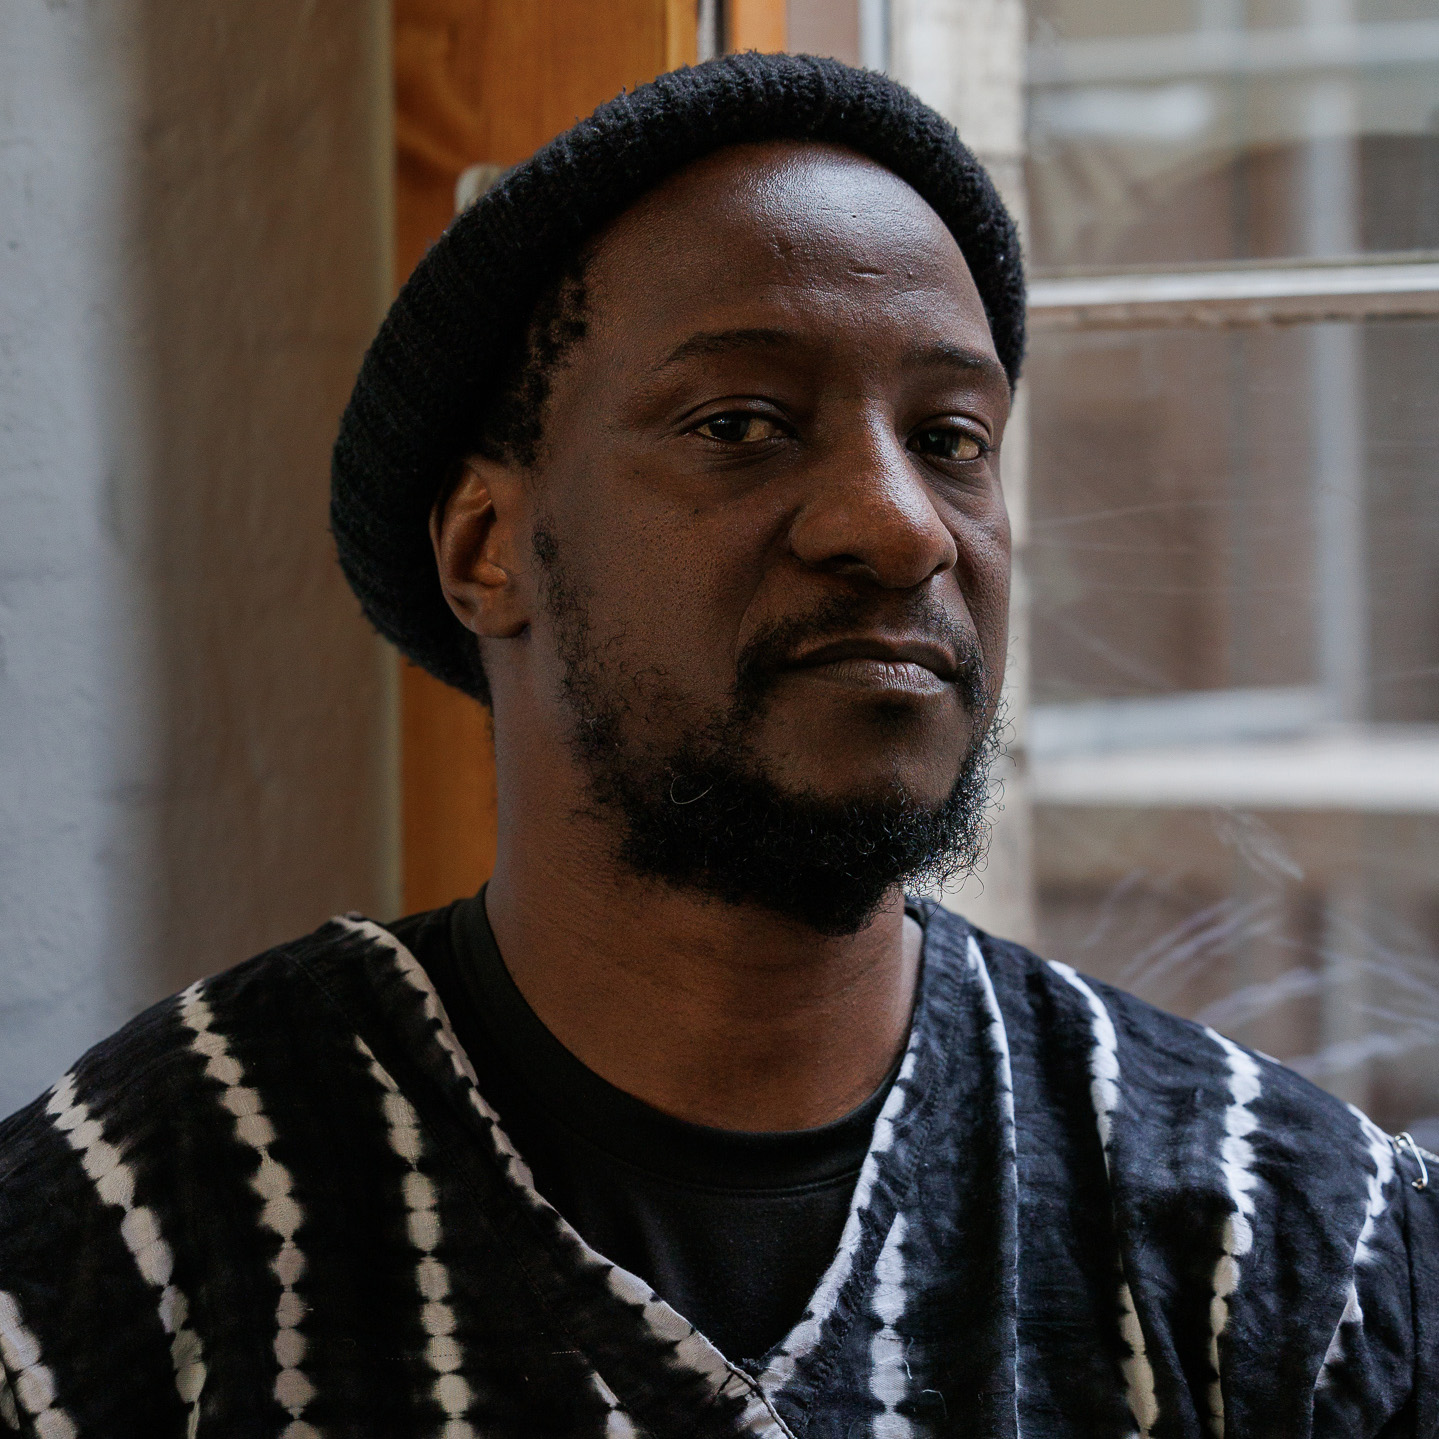 A black man, slightly smiling, wearing a beanie in front of a window